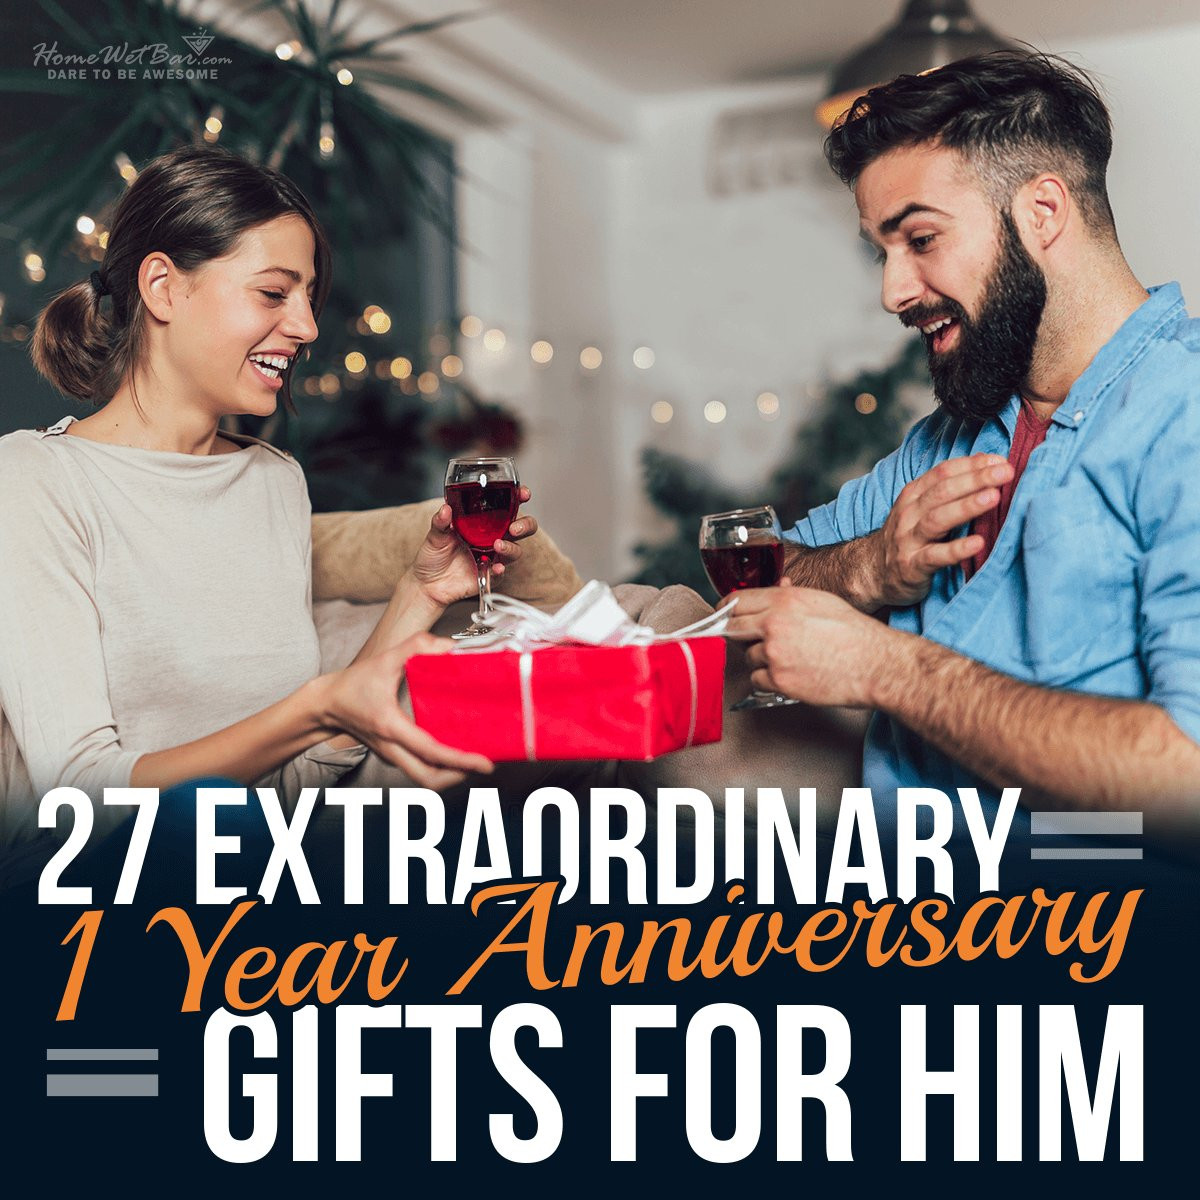 Gift Ideas For 1 Year Anniversary For Him
 27 Extraordinary 1 Year Anniversary Gifts for Him